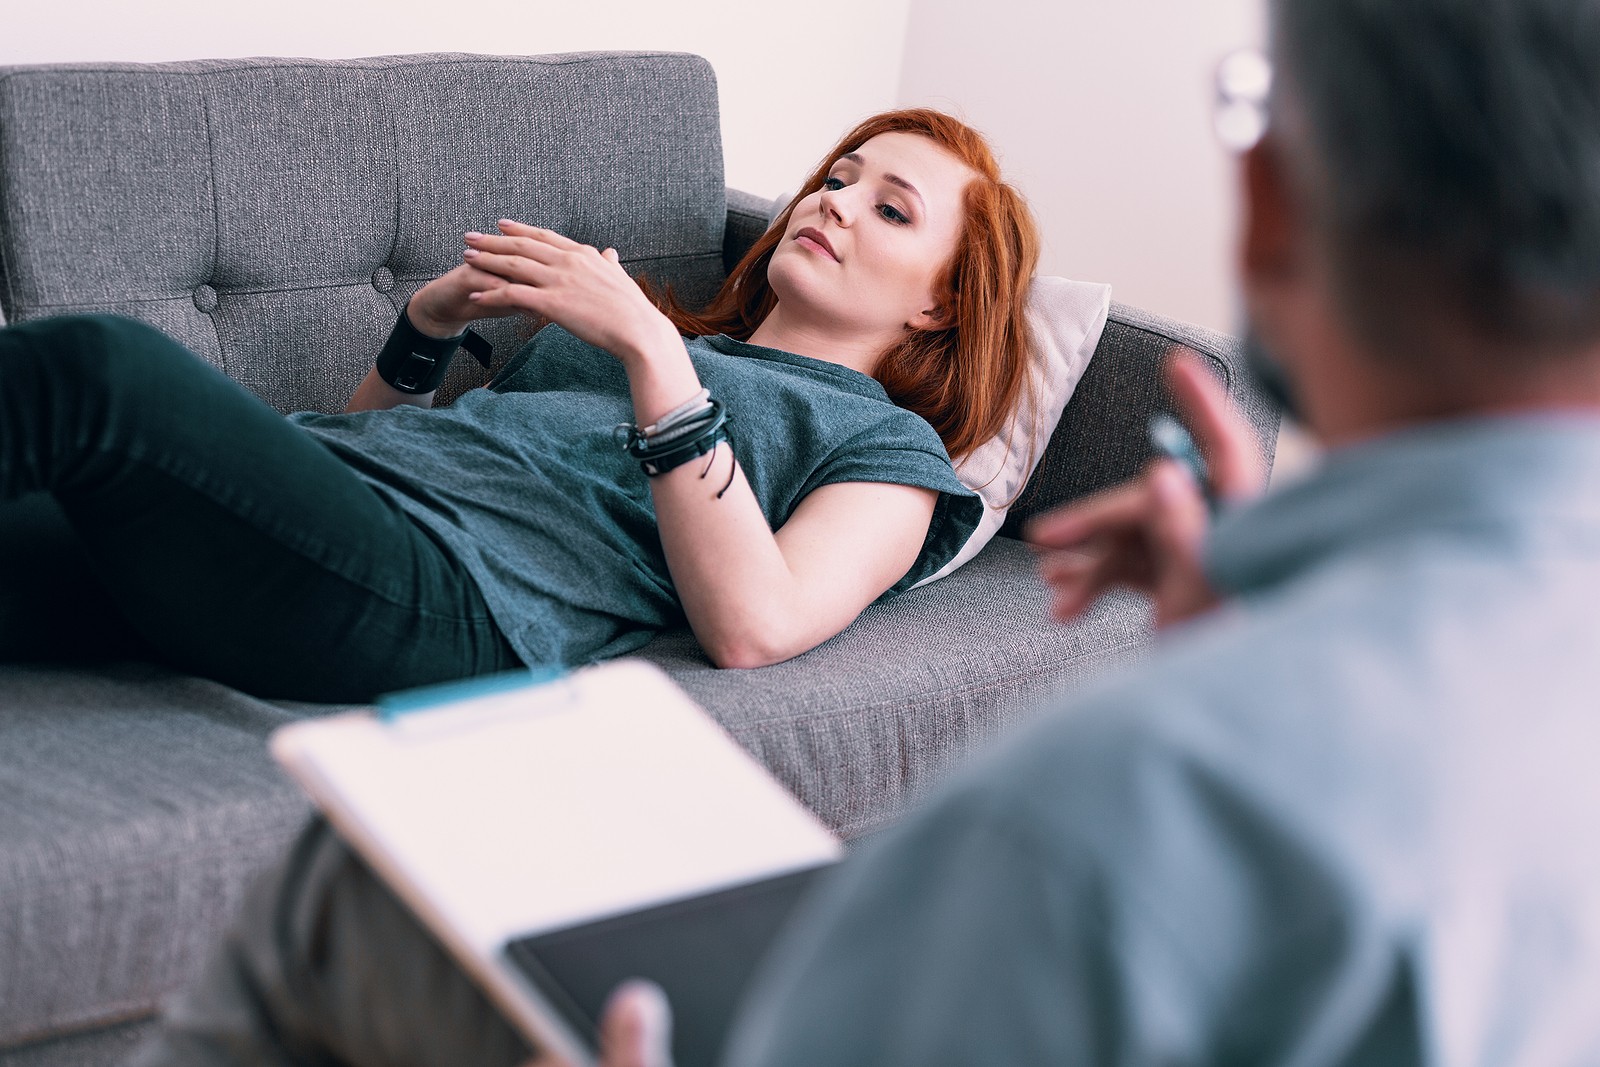 Young woman in therapy speaking to therapist